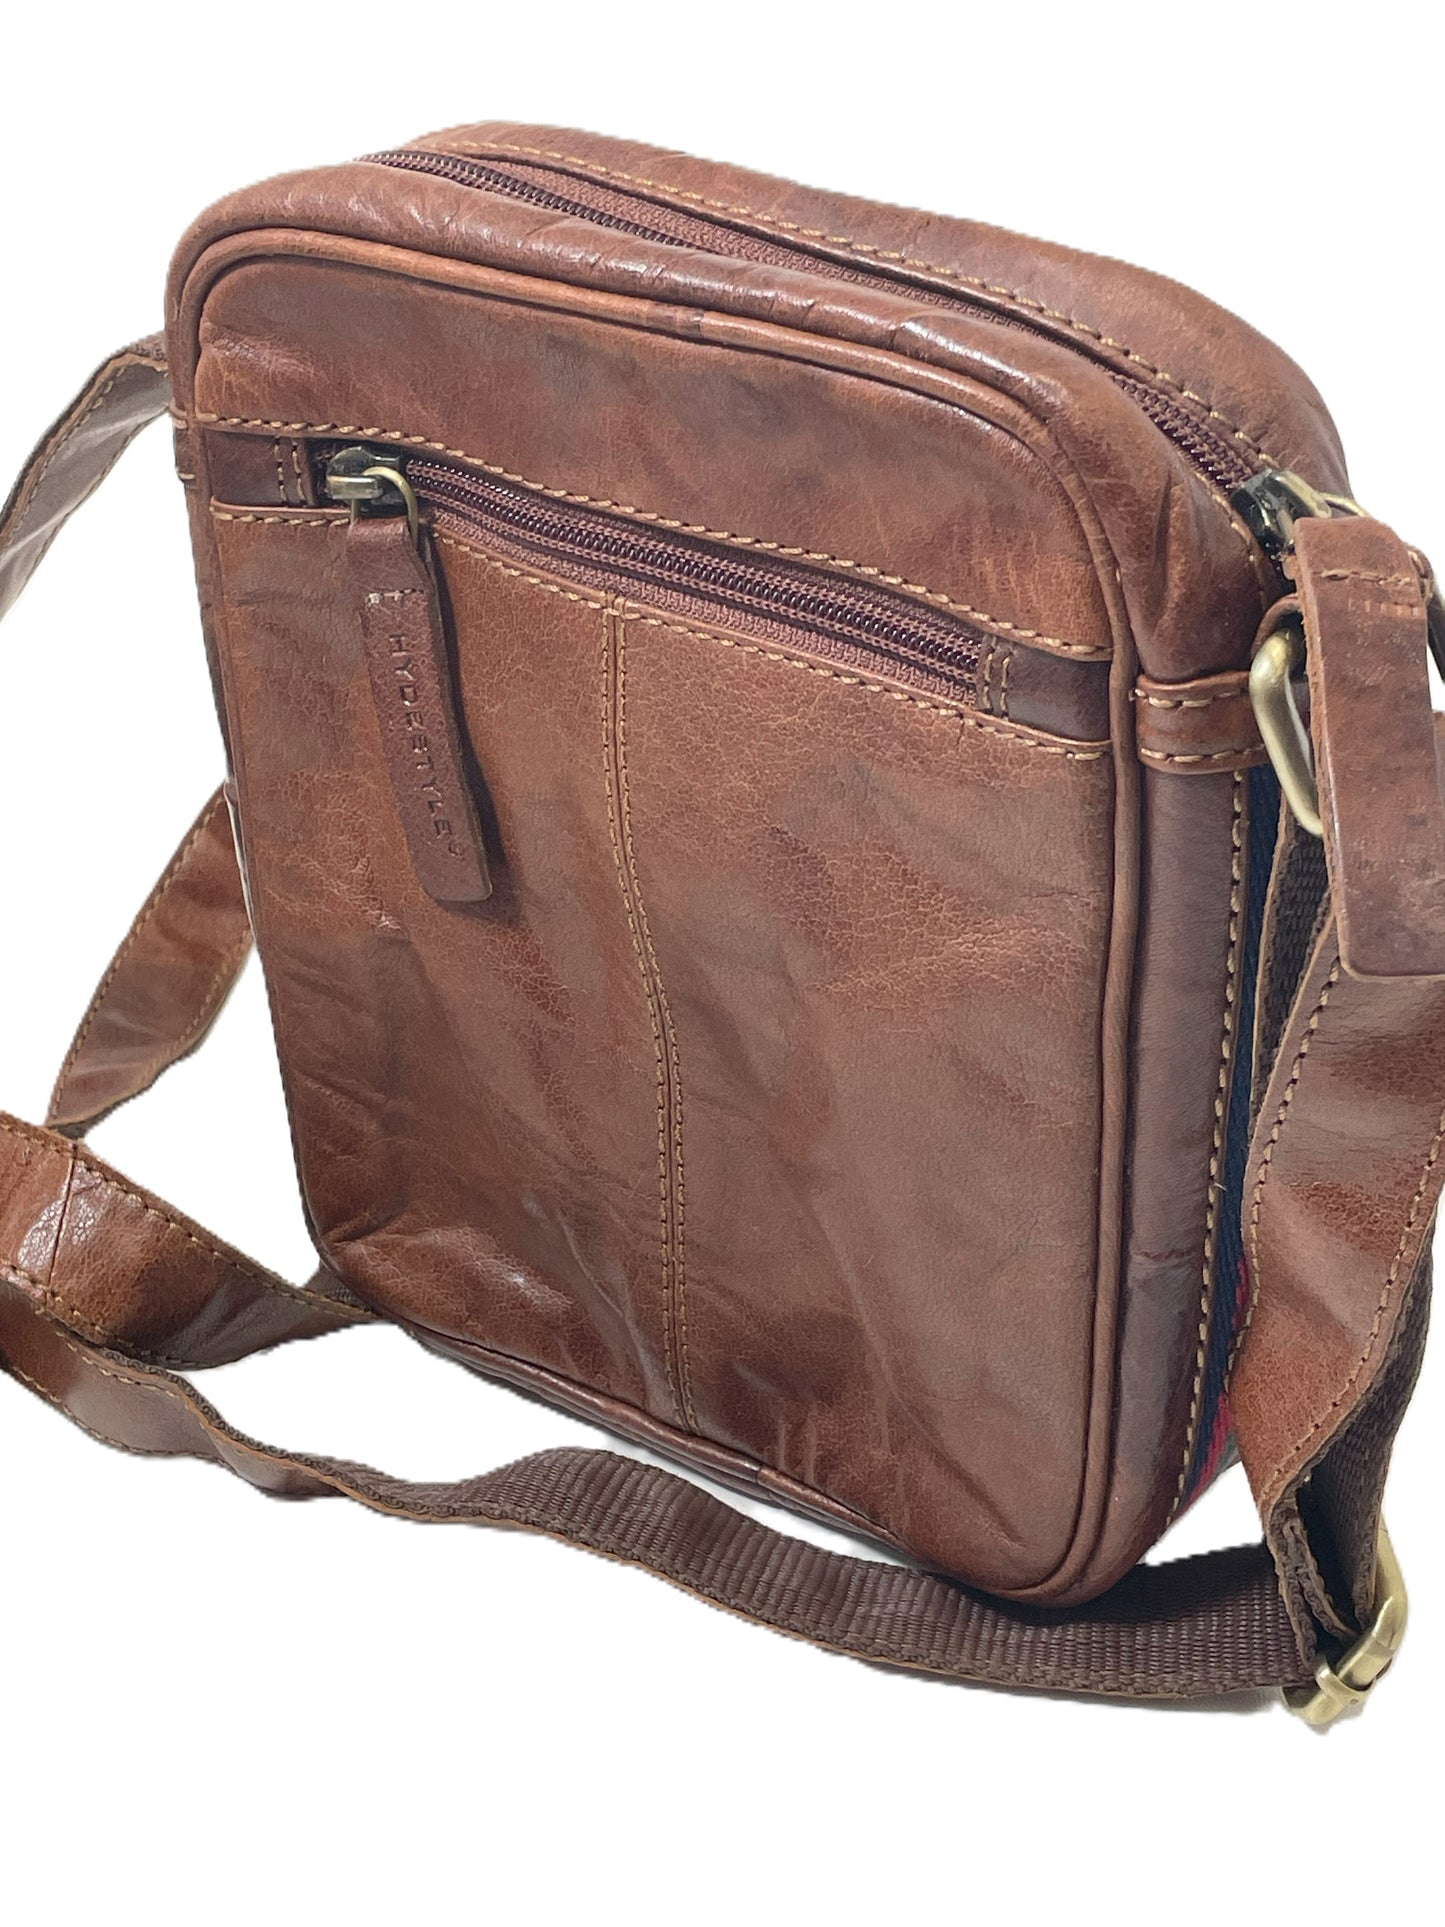 Classic Walnut Brown Leather Small Messenger Travel Bag with Webbing Details for Him Her